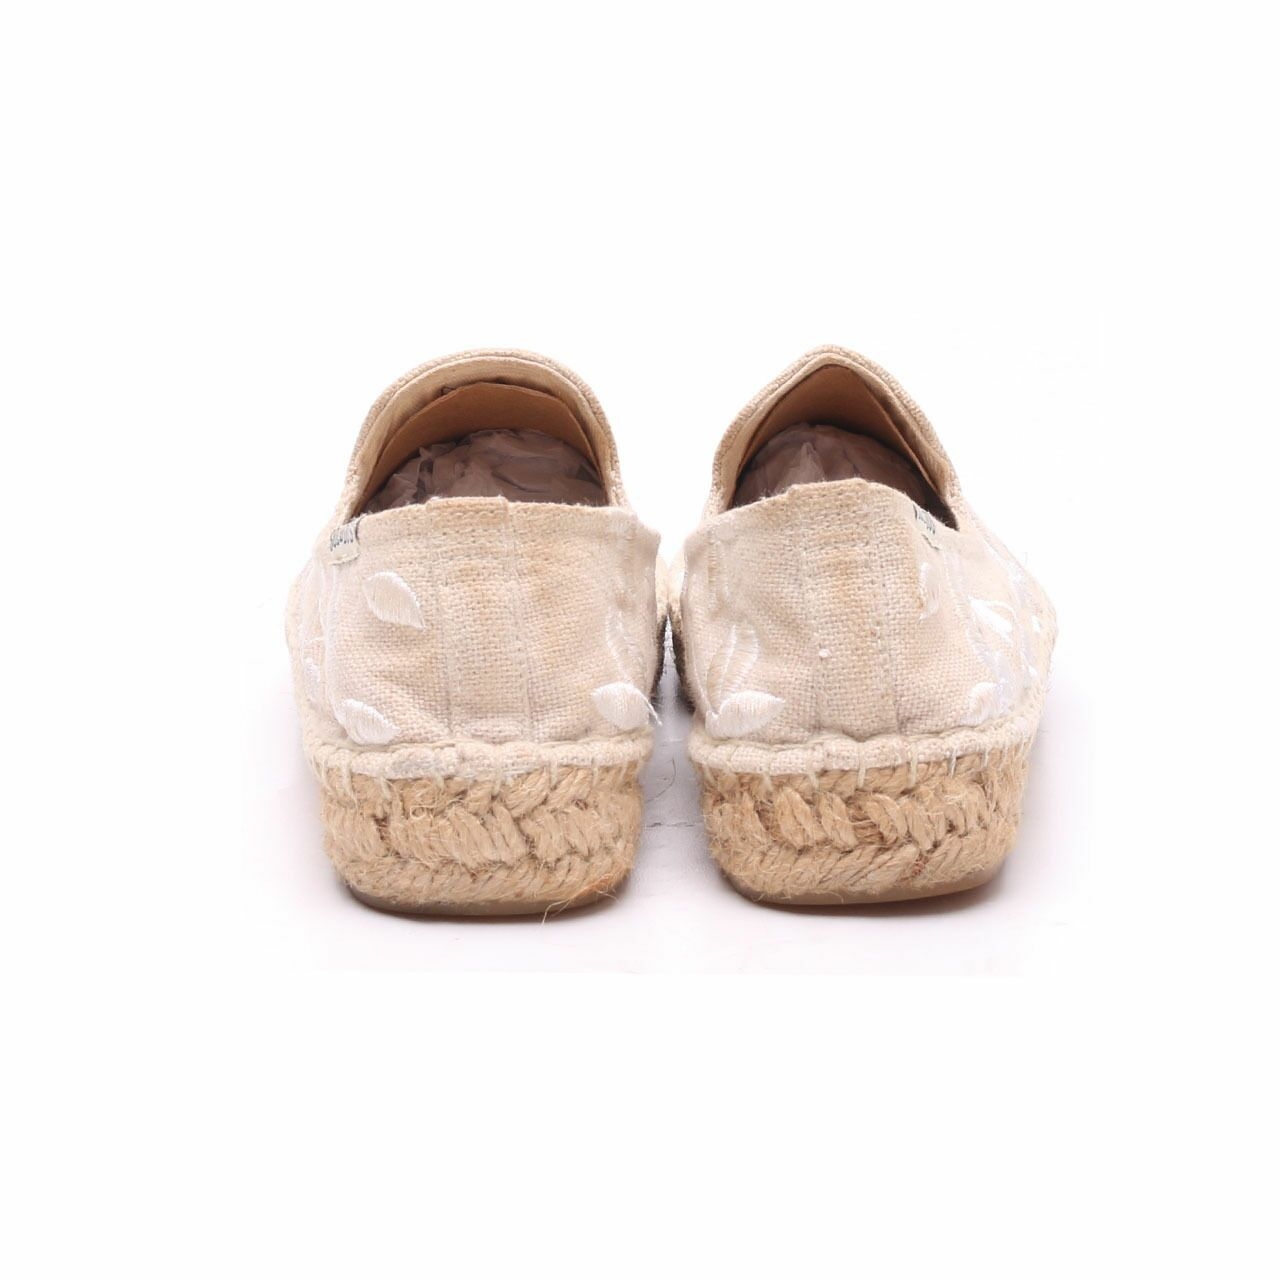 Soludos Beige Shiloh Embroidered Espadrille Loafers Flats